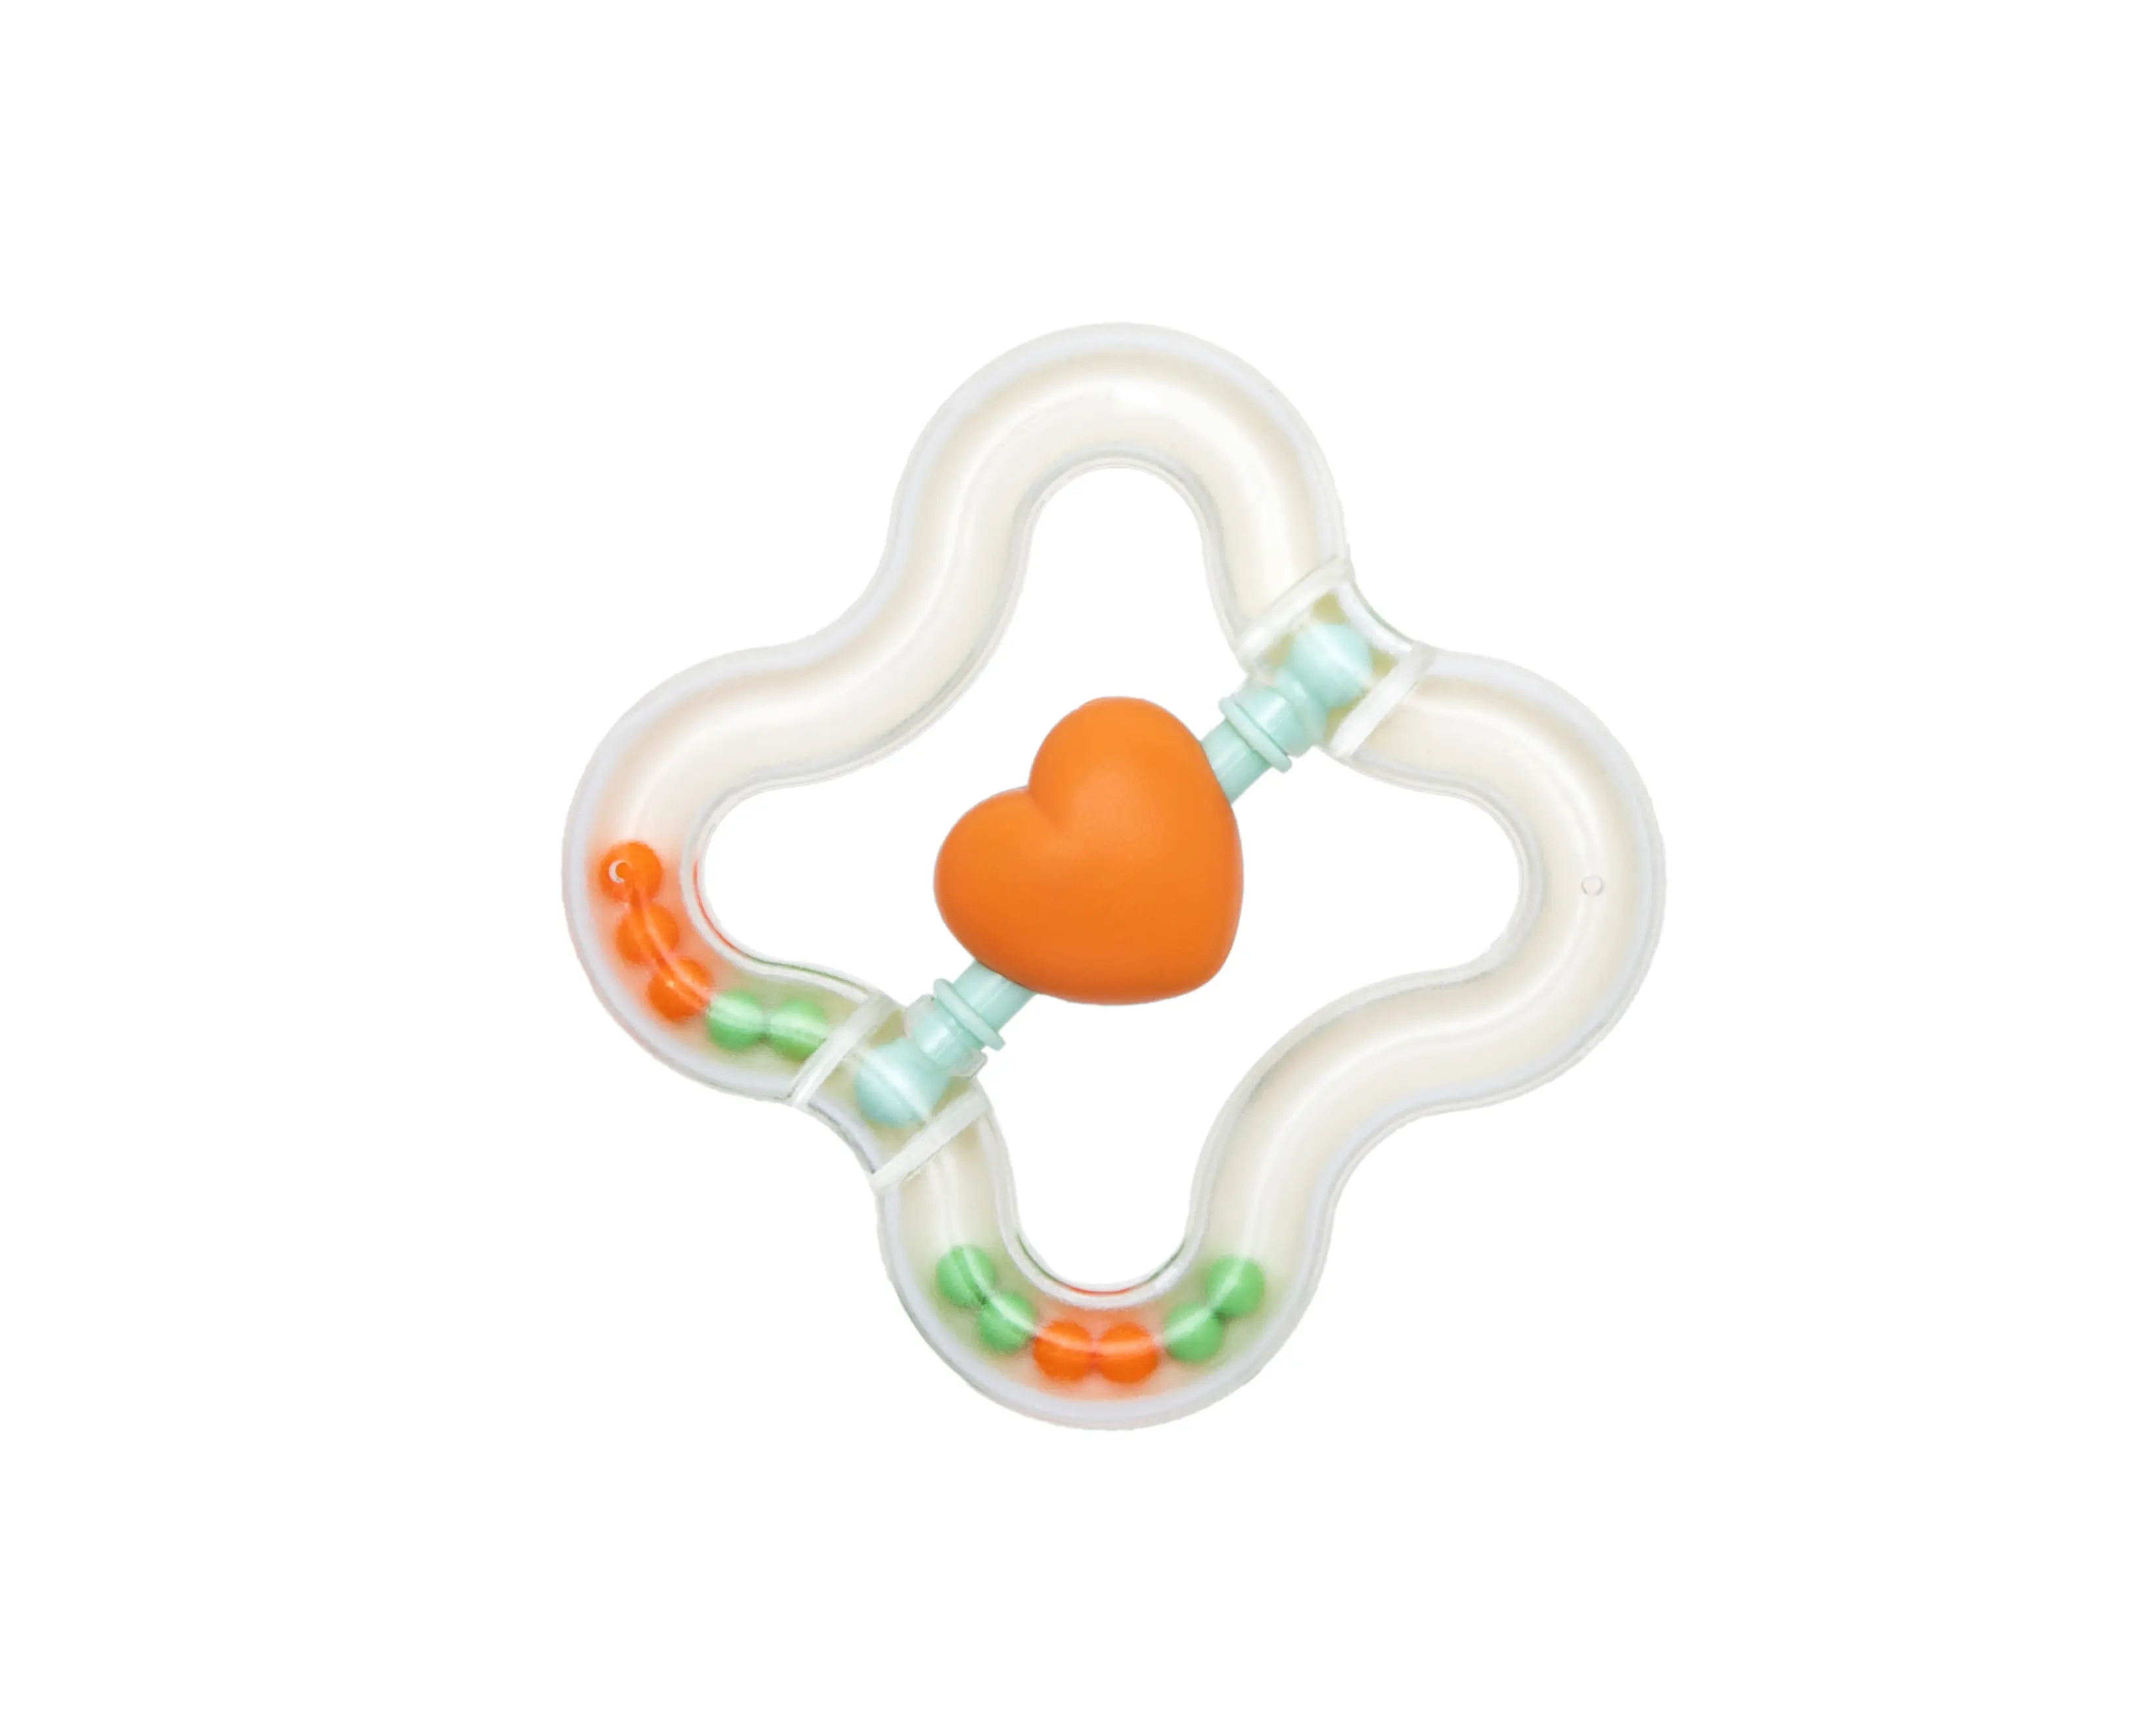 OEM/ODM Alilo Baby Rattle Teethers Food Grade Silicon Gel Safe Material Soft Newborn Baby Gift Toy